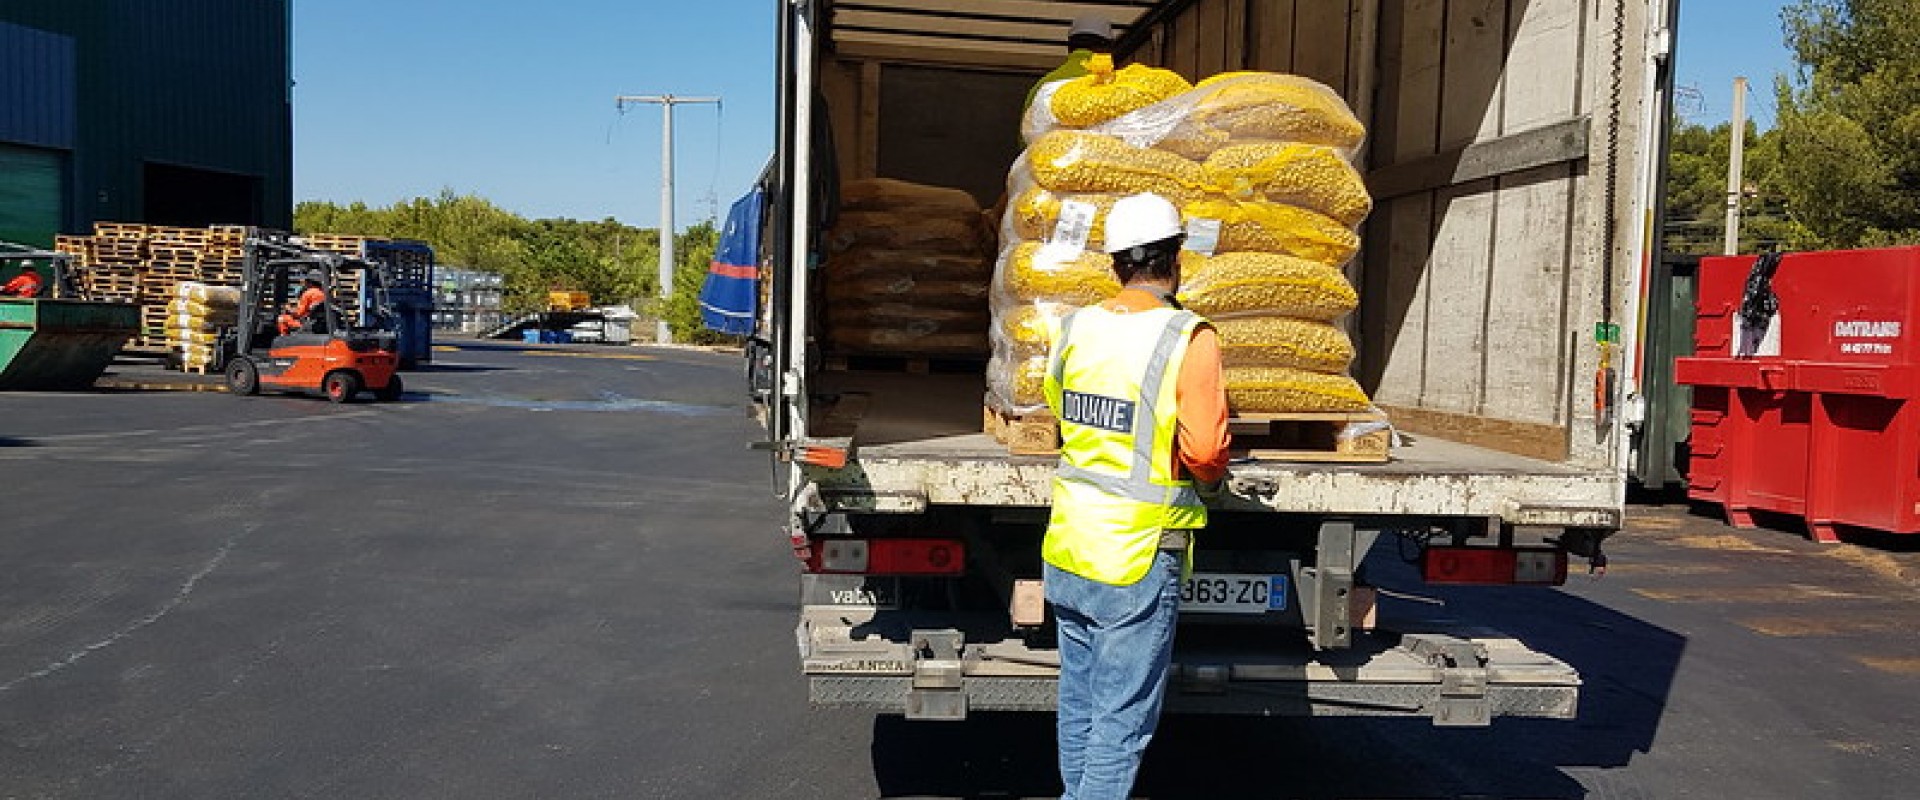 Checks on Imported Fruit and Vegetables Transferred to Customs